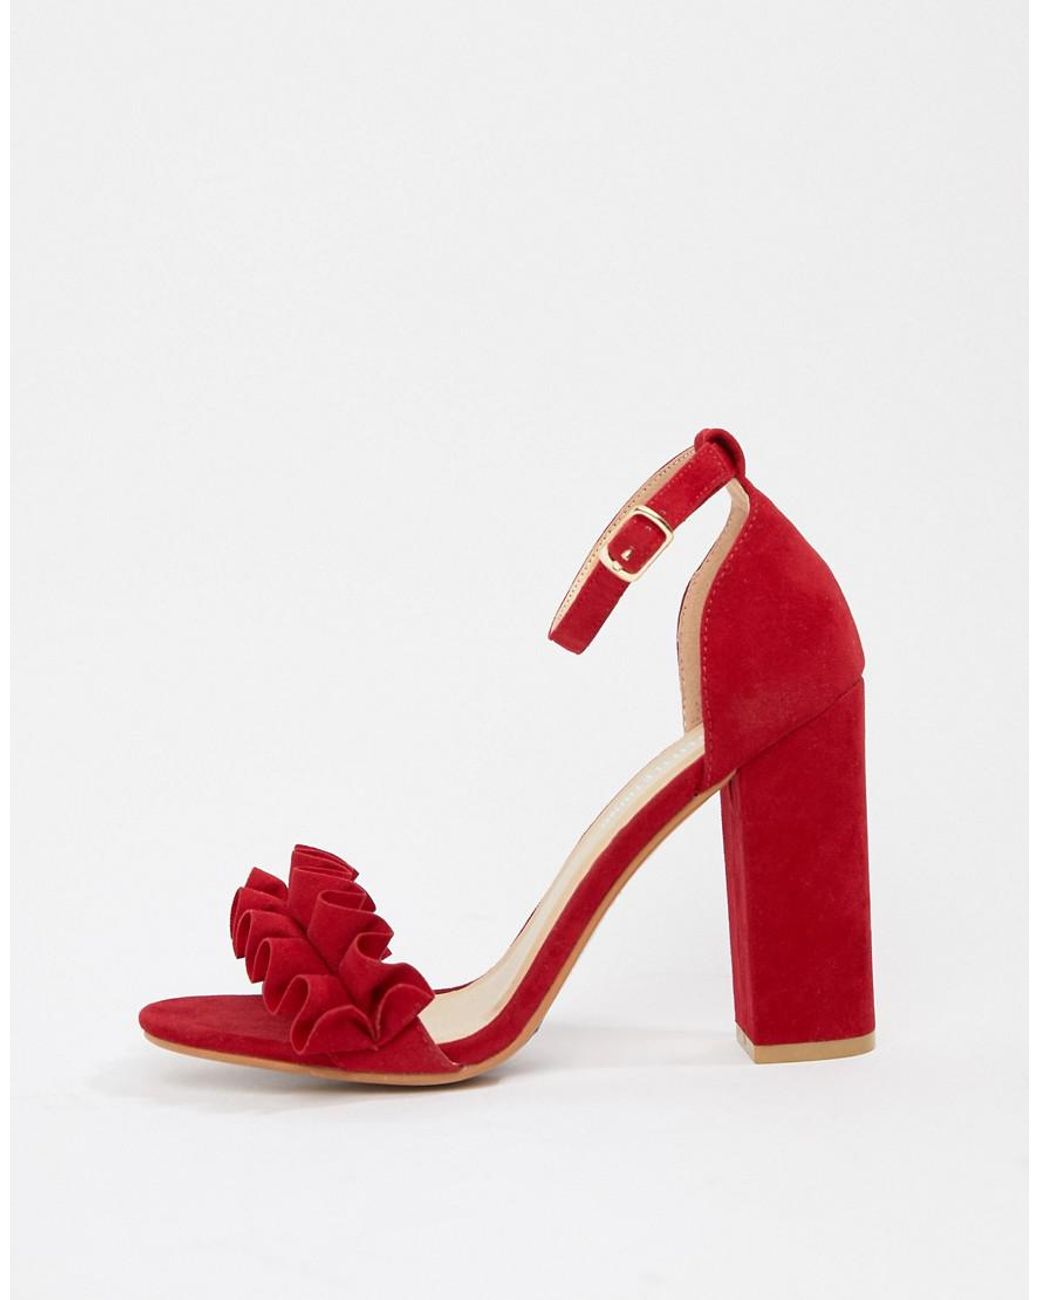 PrettyLittleThing Ruffle Block Heeled Sandals In Red | Lyst